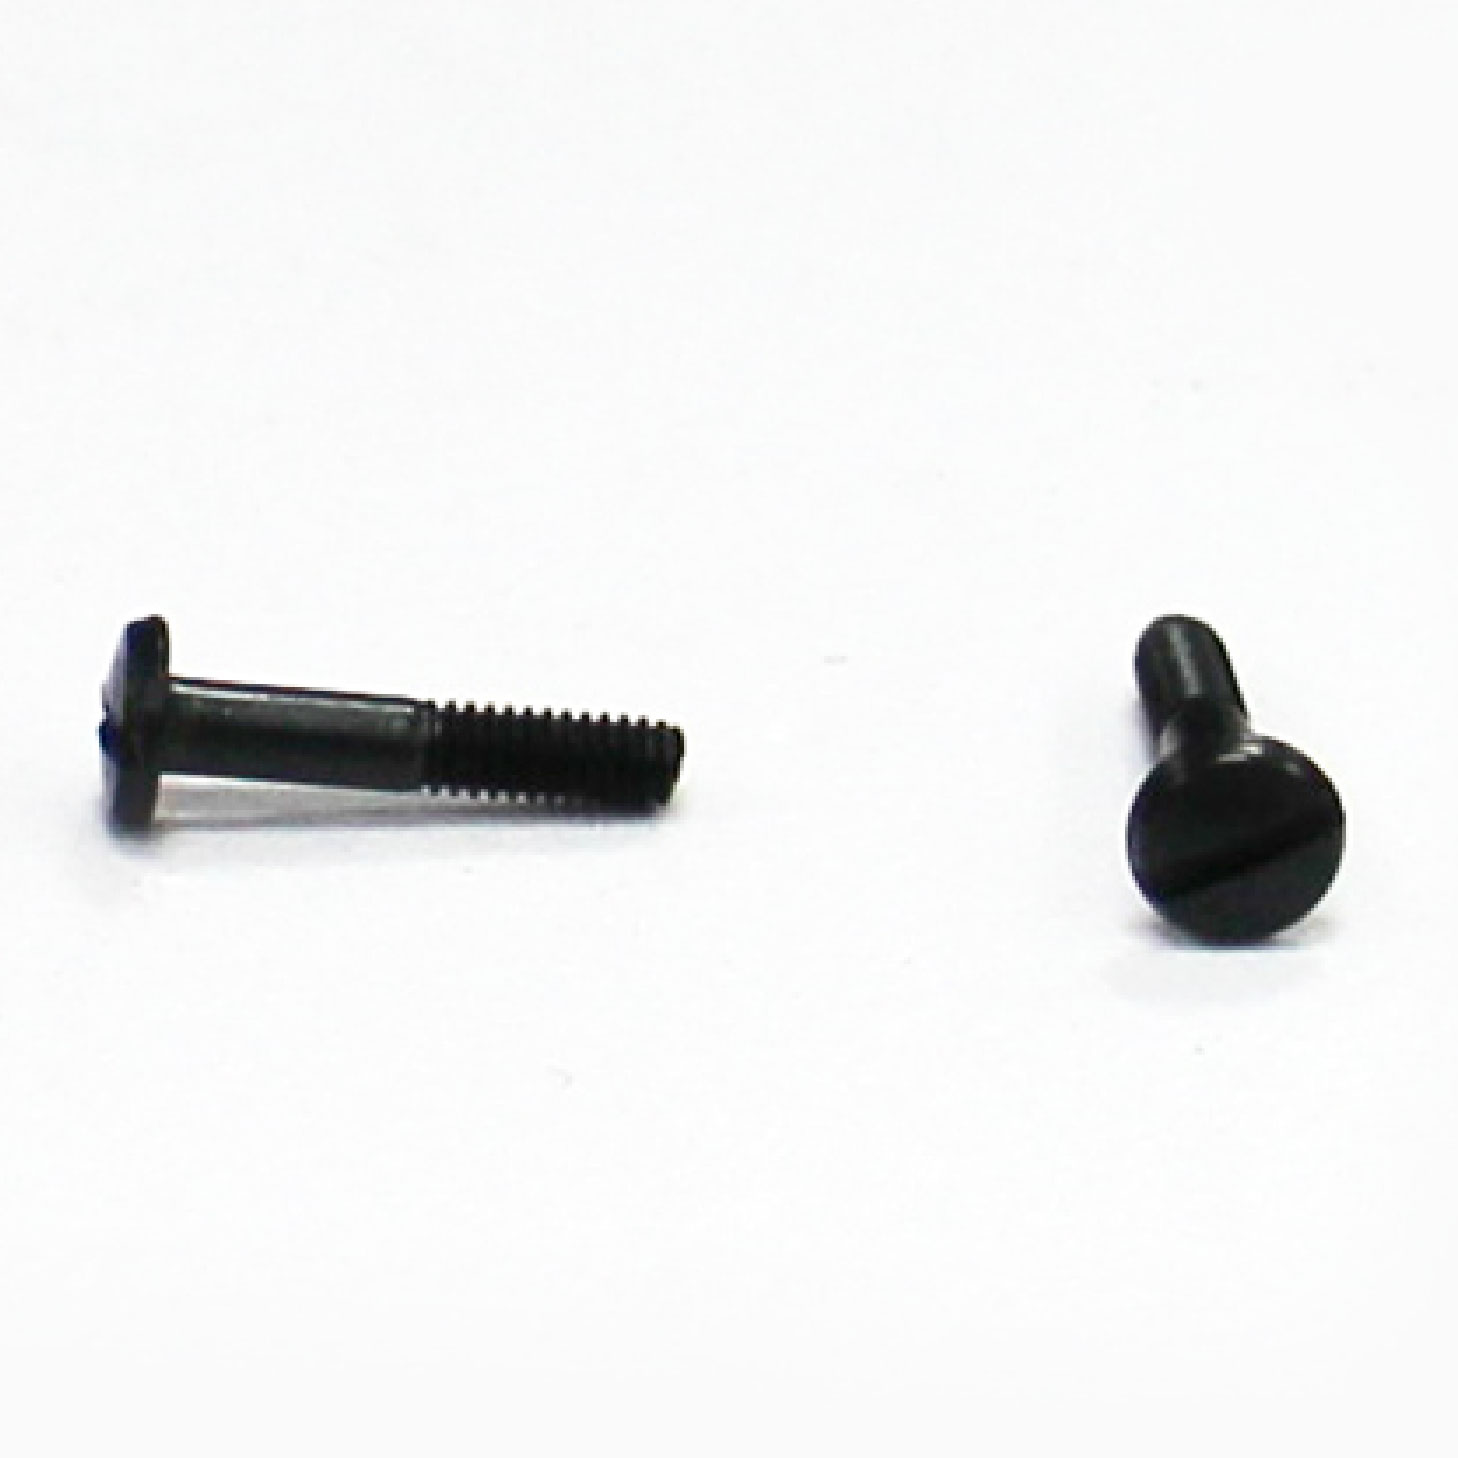 SCREW FOR 4-NEEDLE, 6-THREAD, FEED-OFF-THE-ARM FLATSEAMER